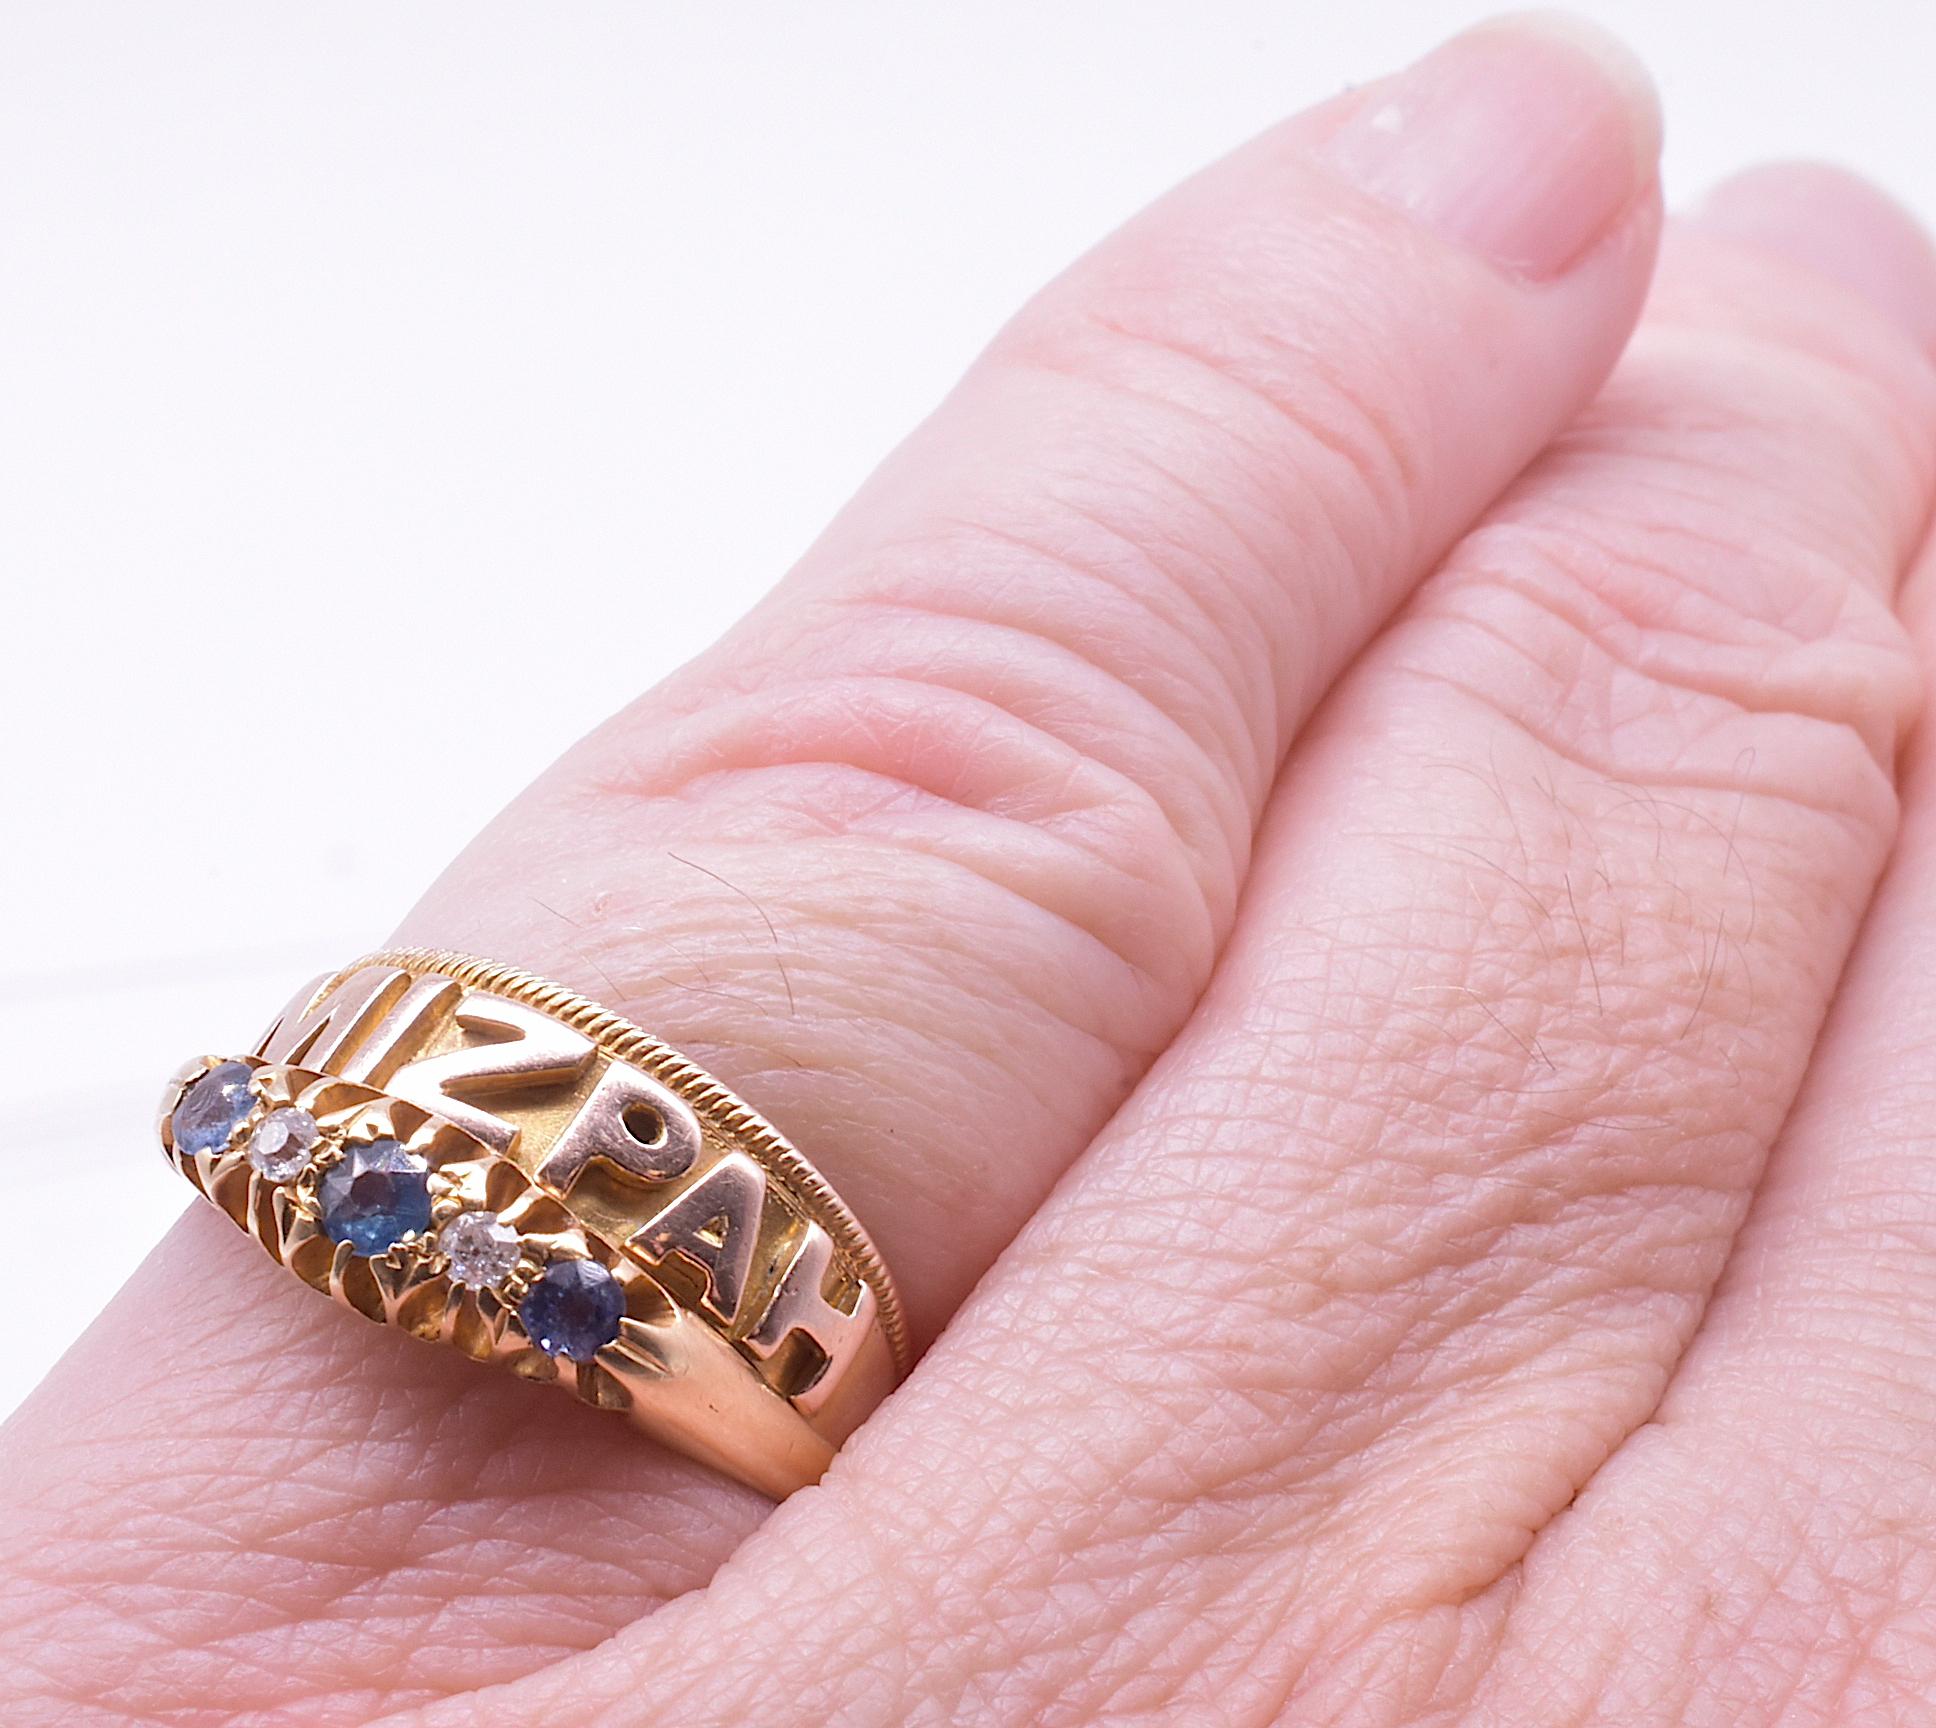 Elegant Edwardian five stone sapphire and diamond band ring shown with one of our gold Mitzvah bands. With its slender profile, this makes a wonderful ring stack.  Shown in one photo with our Mizpah ring and in another, our diamond gypsy ring,